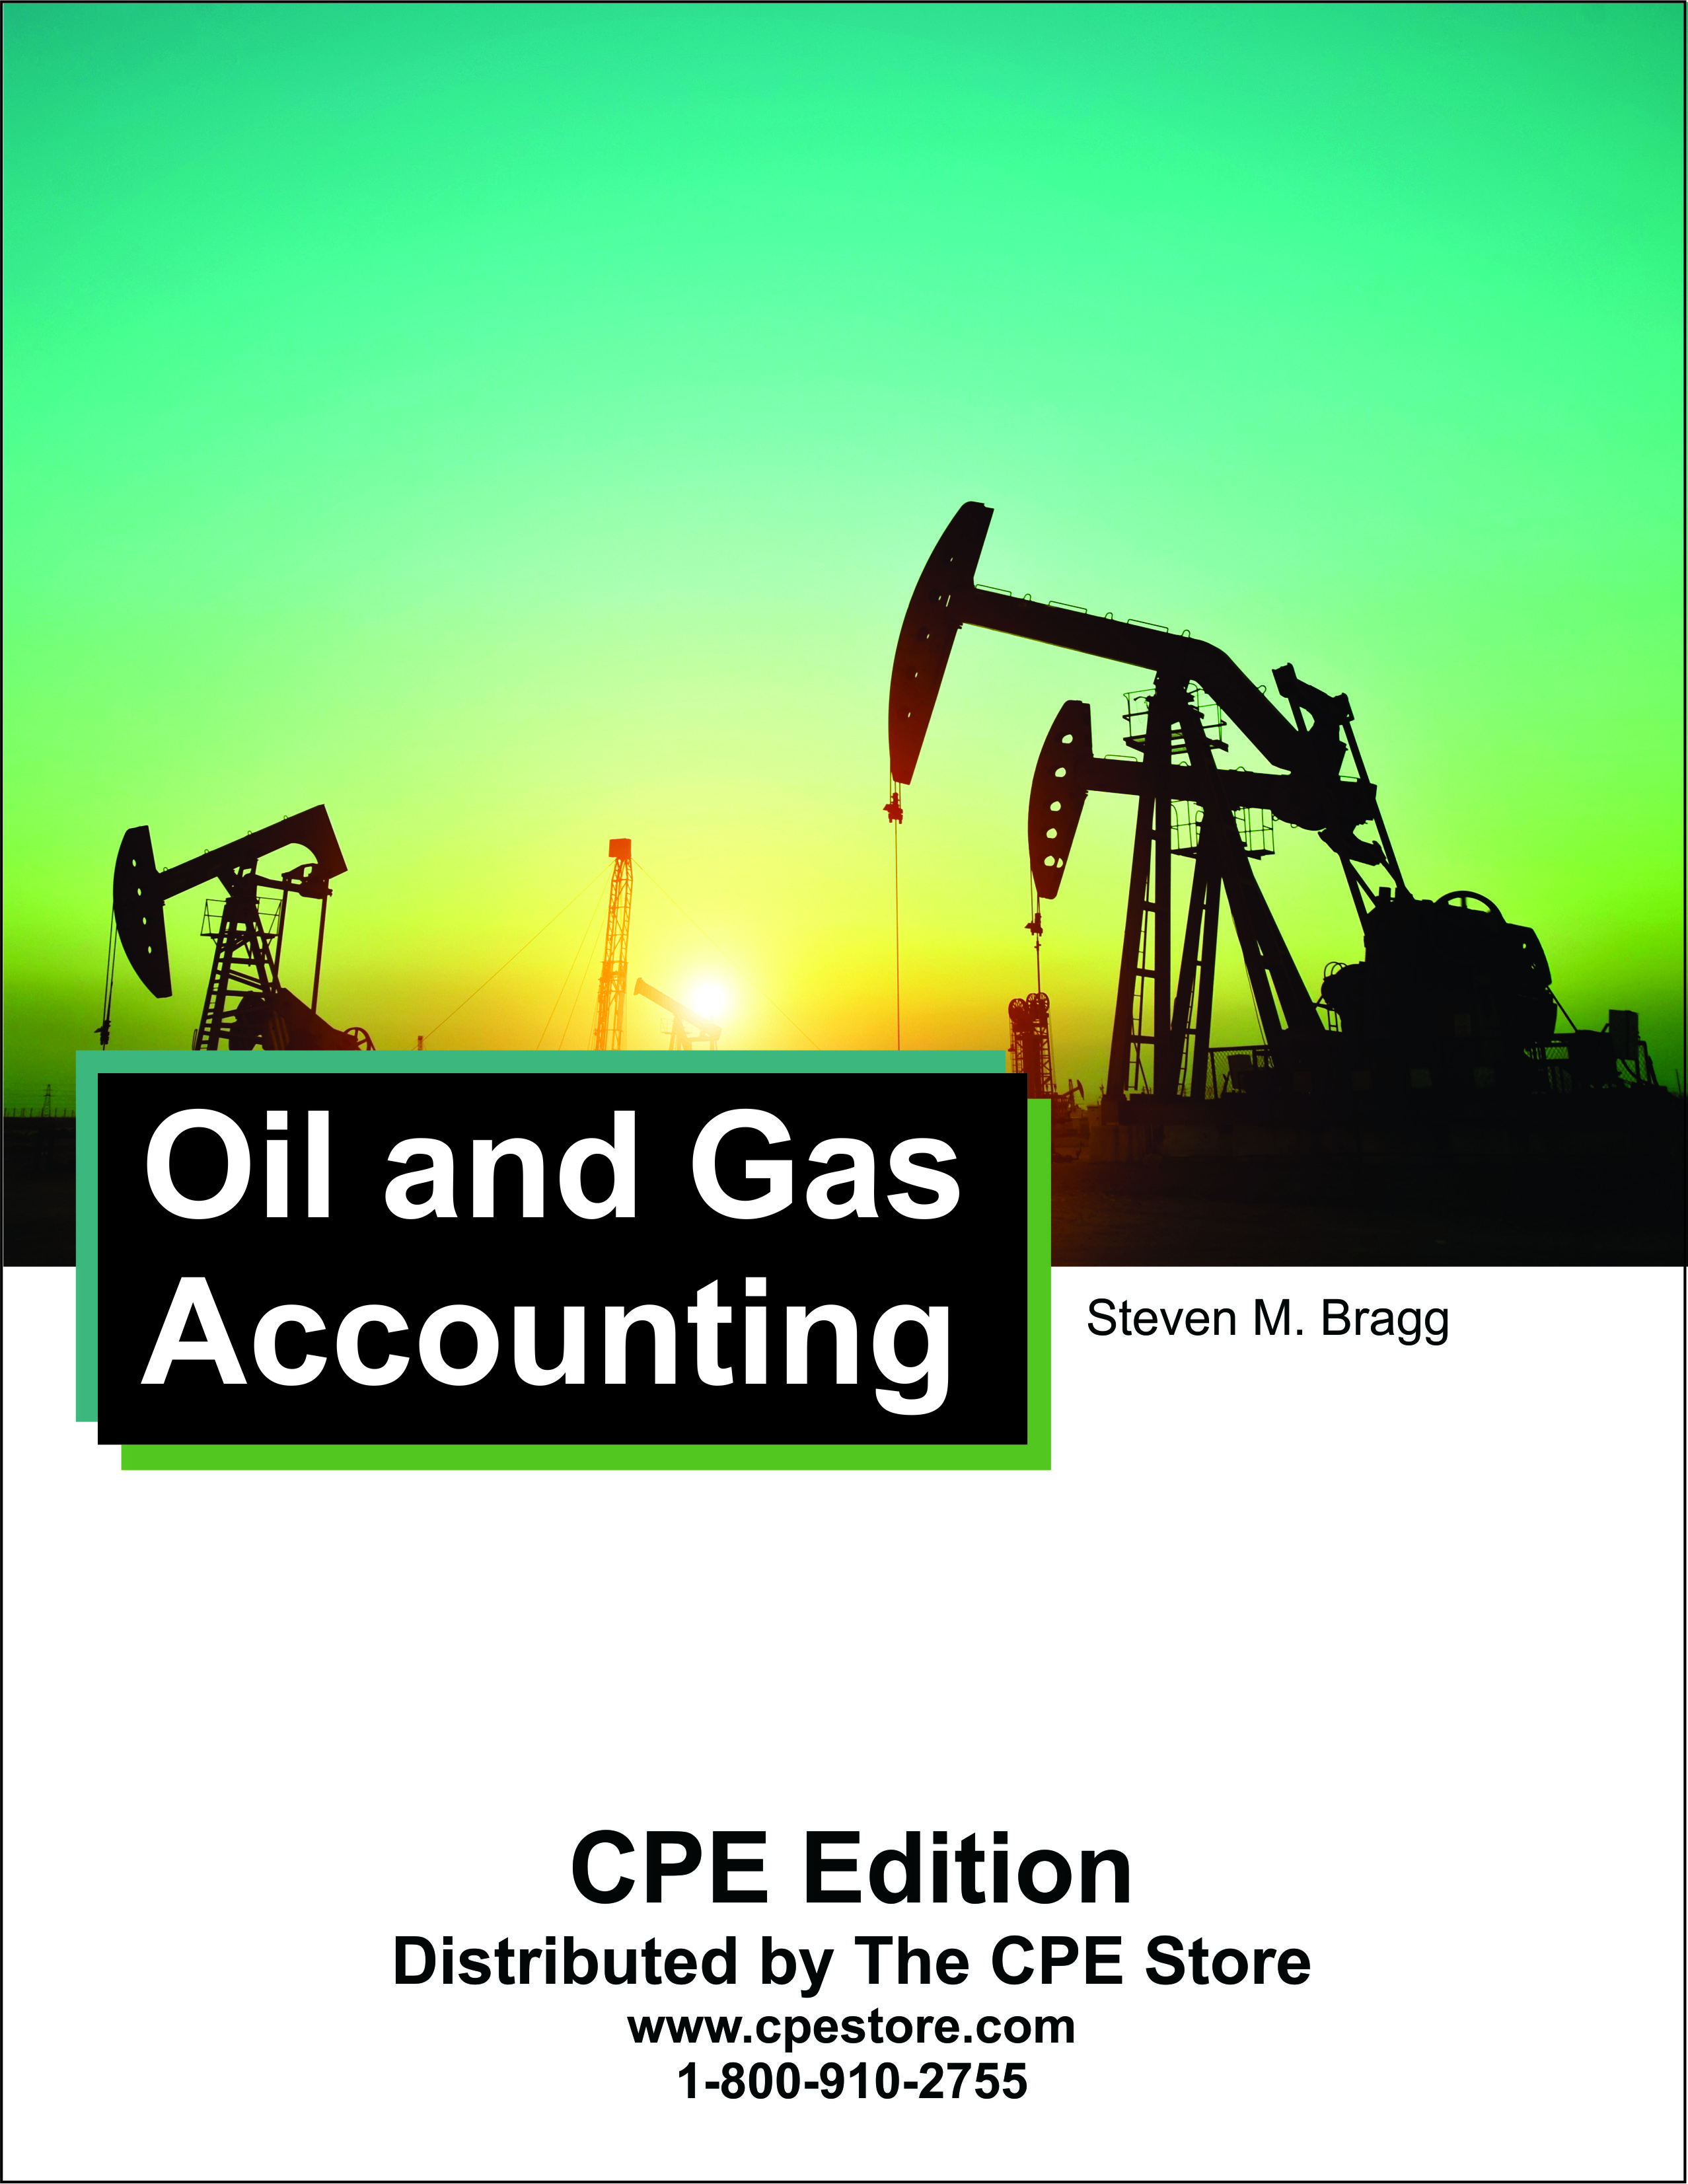 Oil and Gas Accounting